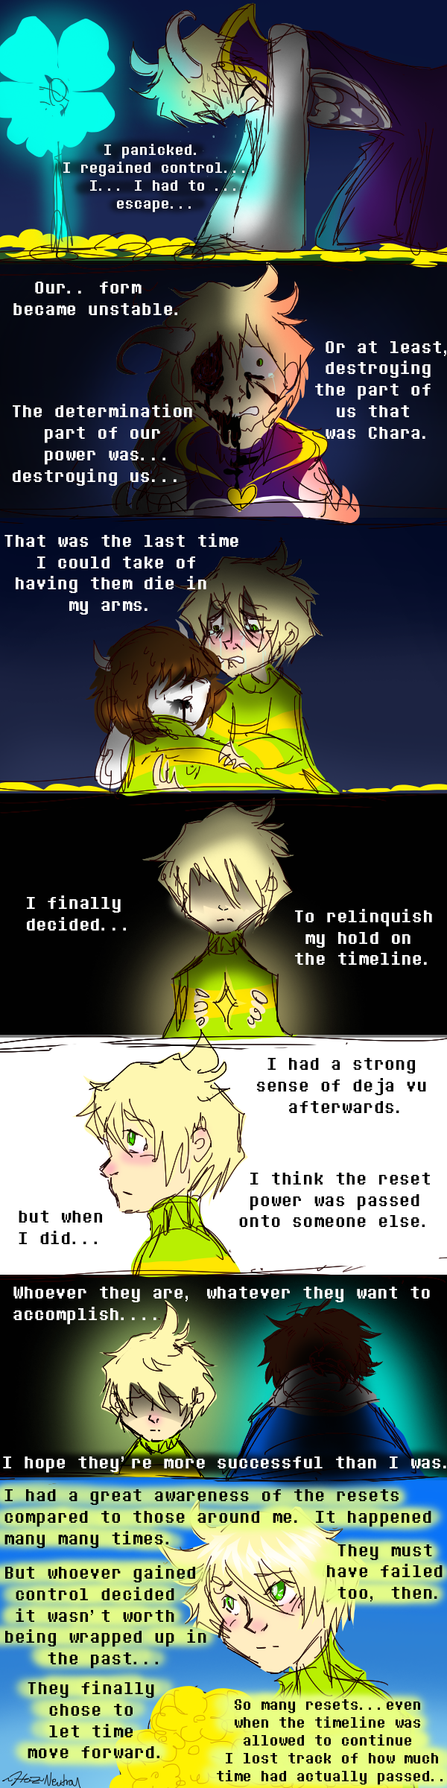 OVERTALE p6 by HezuNeutral on DeviantArt